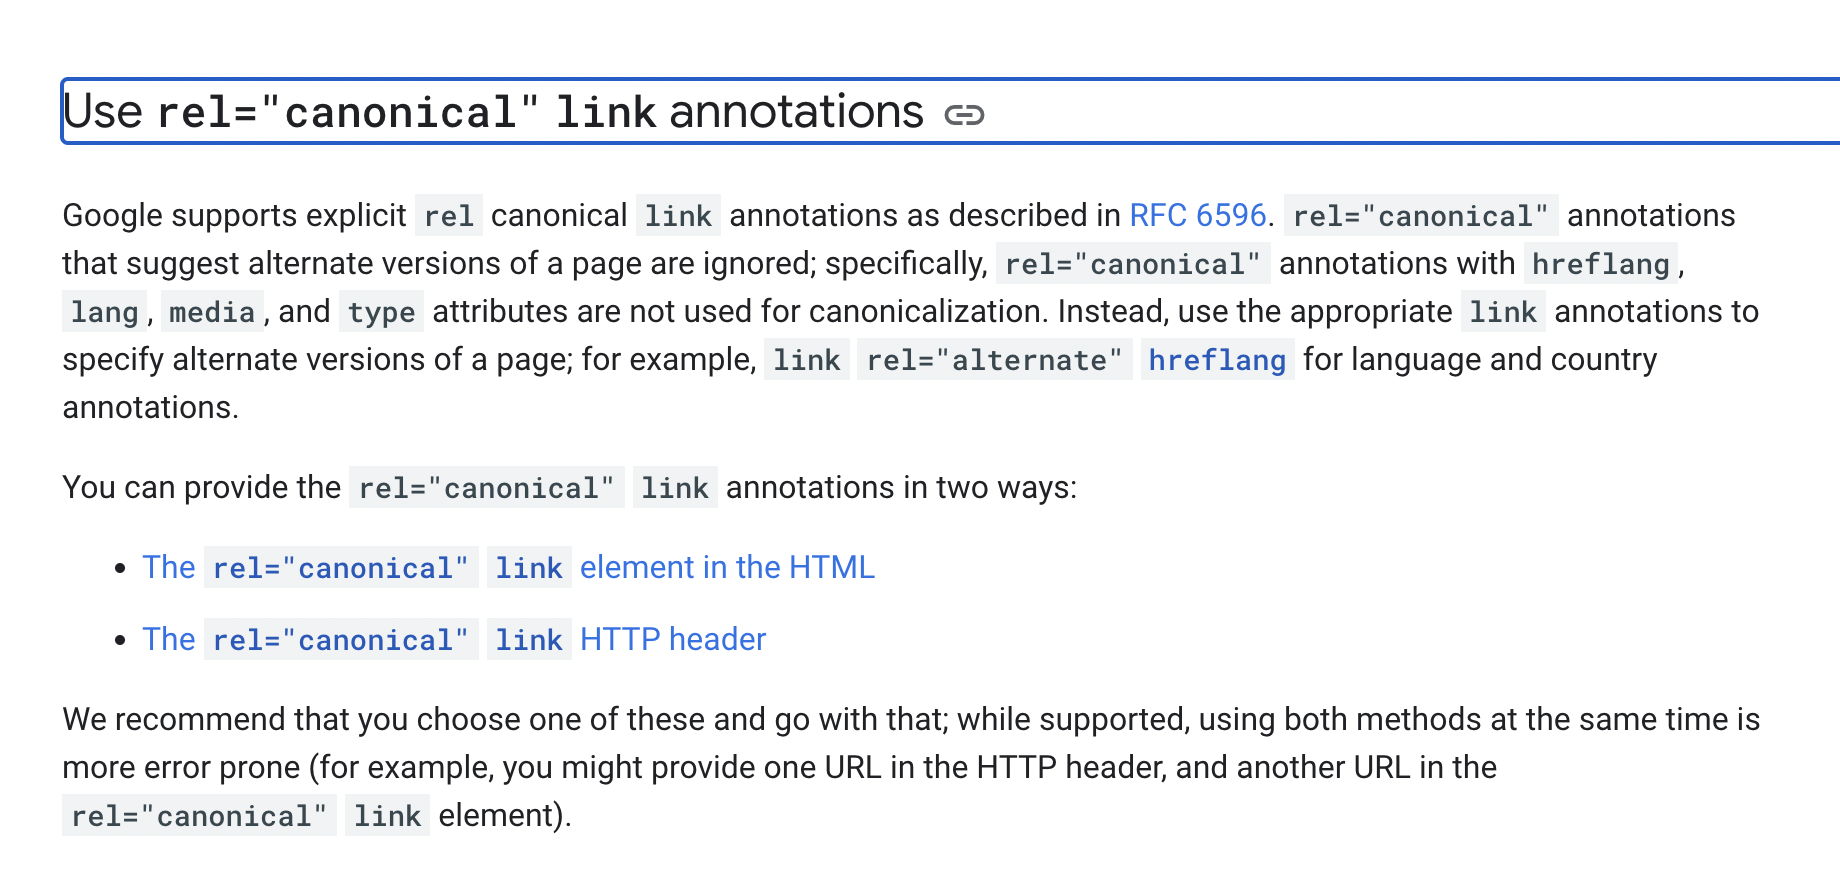 Use rel="canonical" link annotations